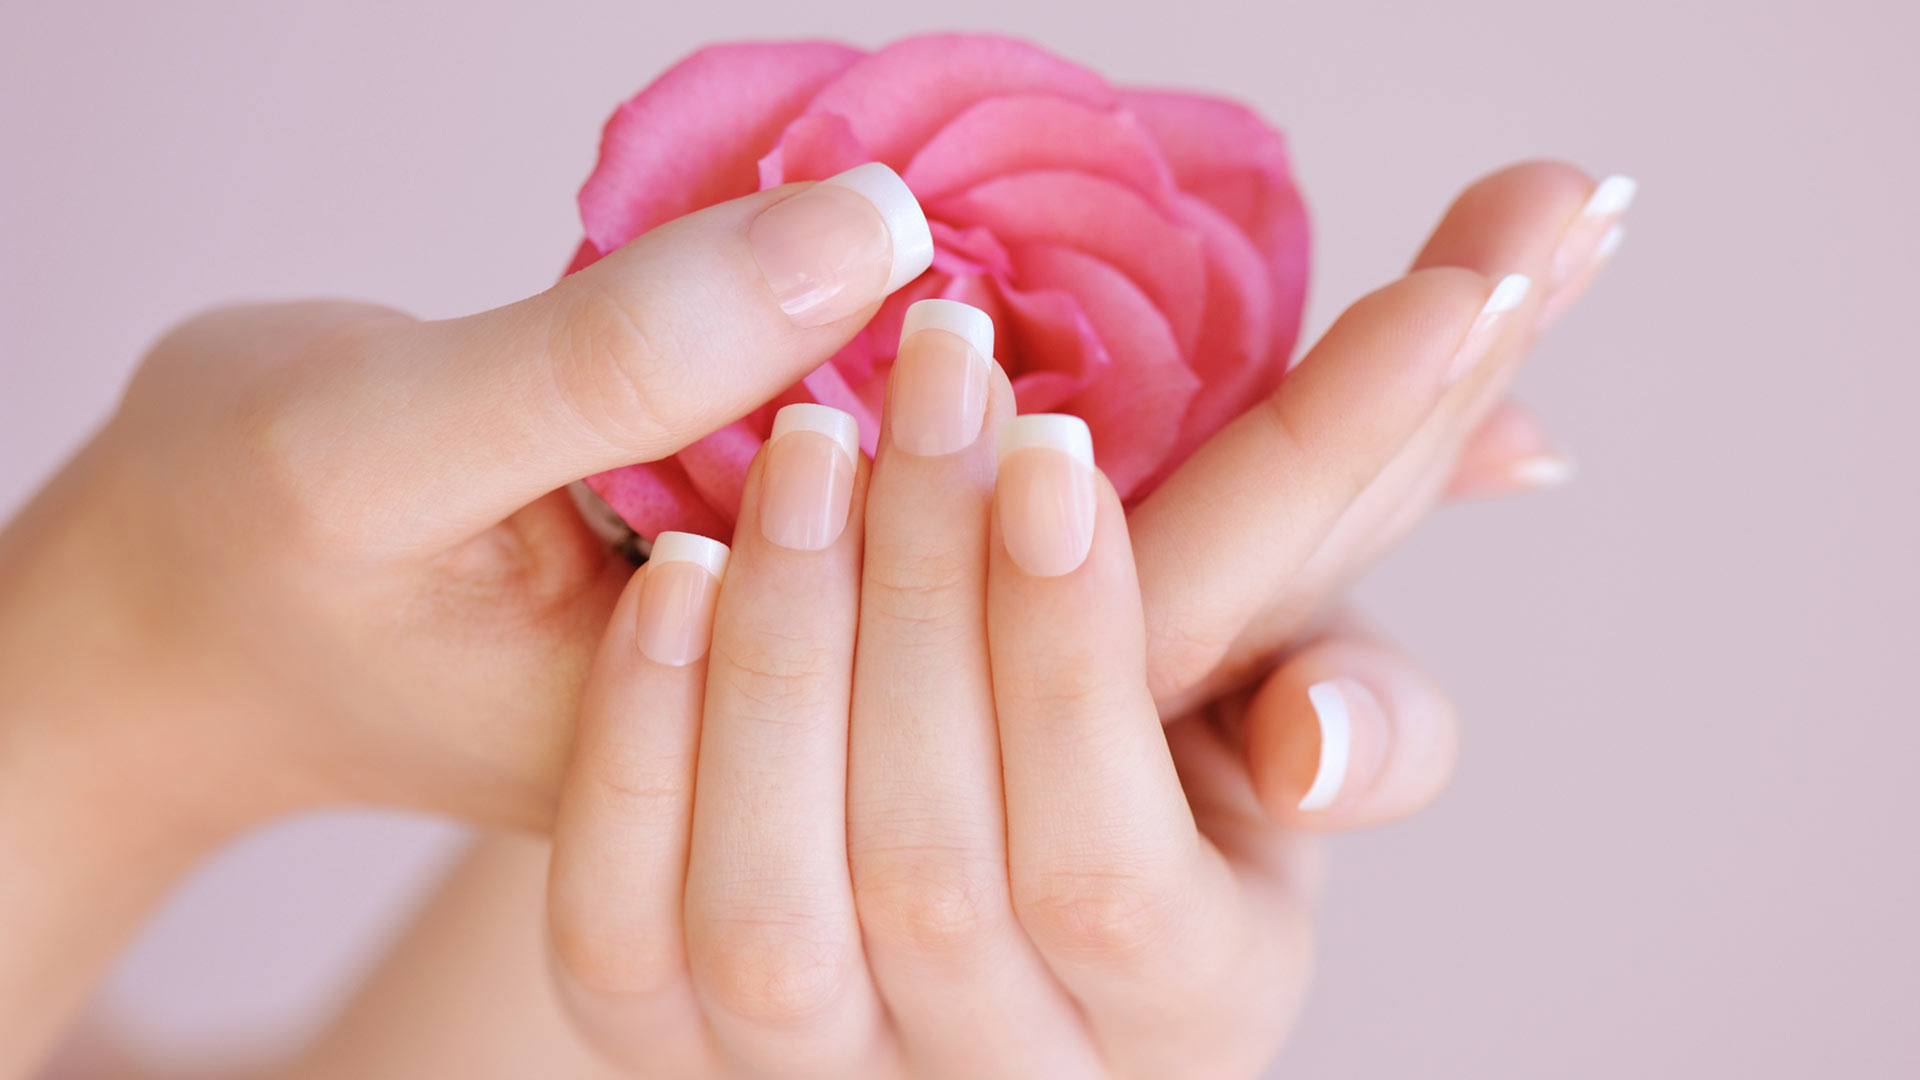 Nails Salon is the best nail salon in Euless, TX 76039